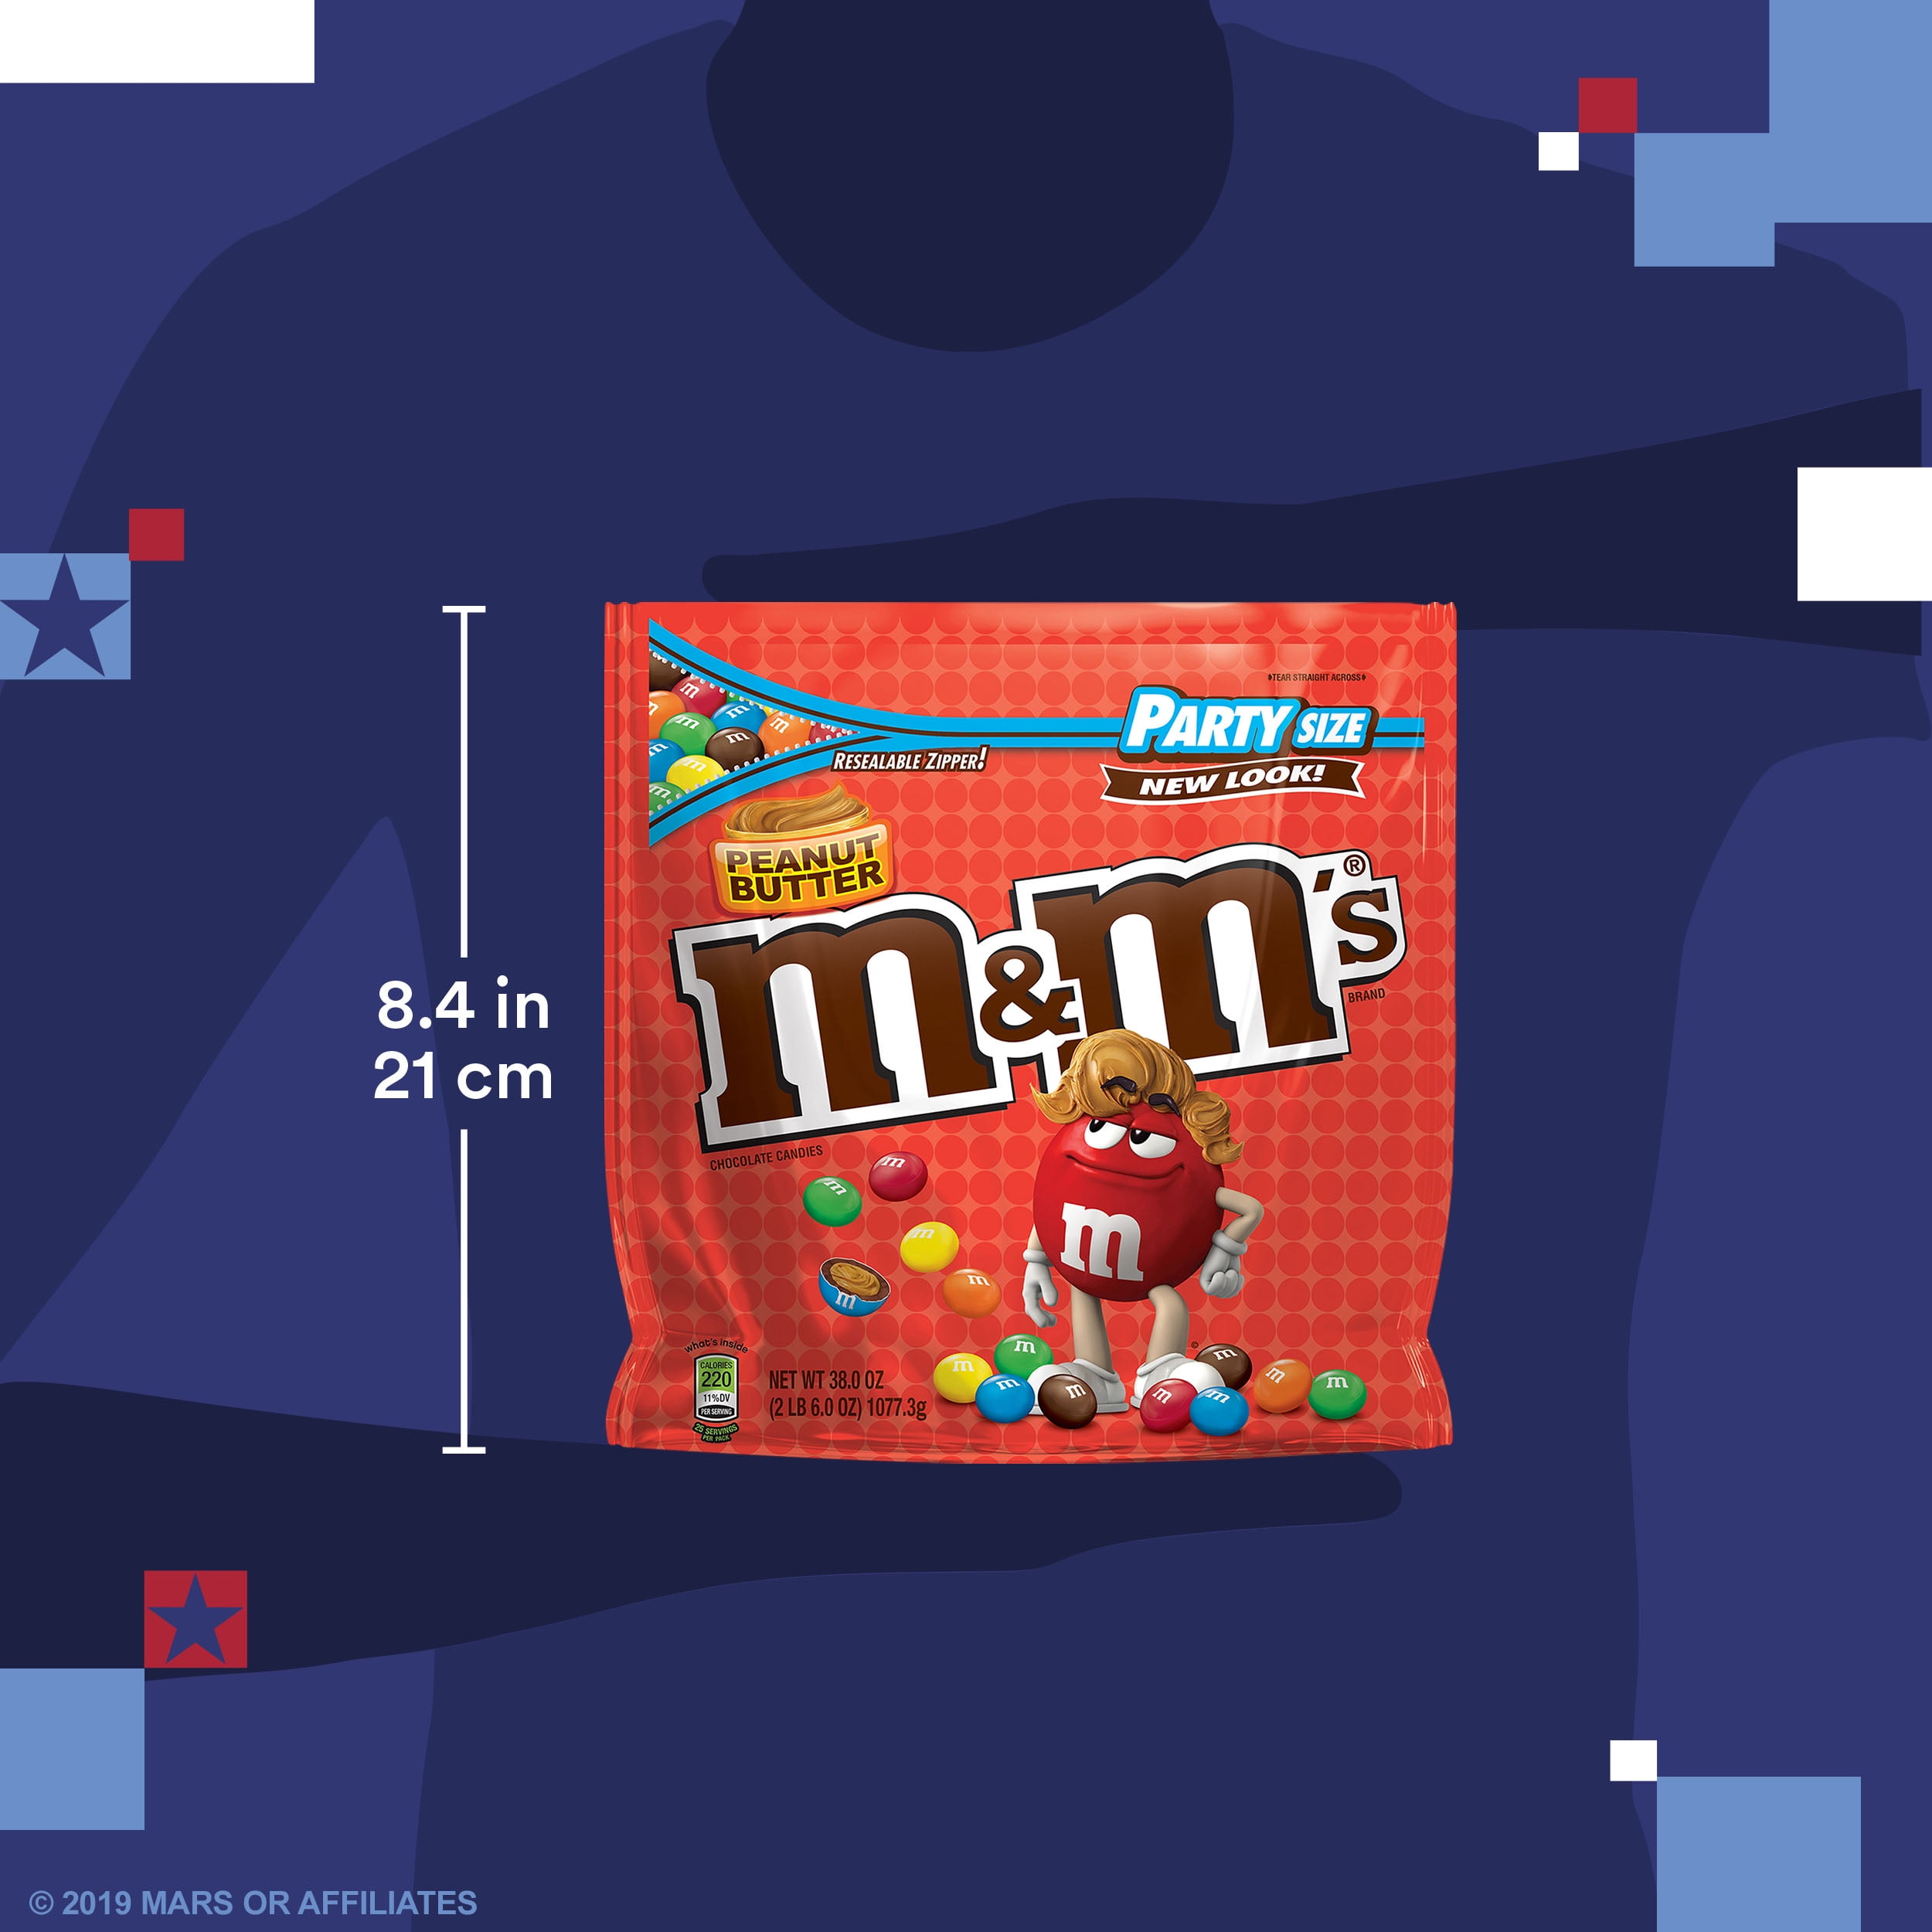  M&M'S Summer Peanut Chocolate Candy Red, White & Blue  Assortment, Party Size, 38 oz Bag : Grocery & Gourmet Food